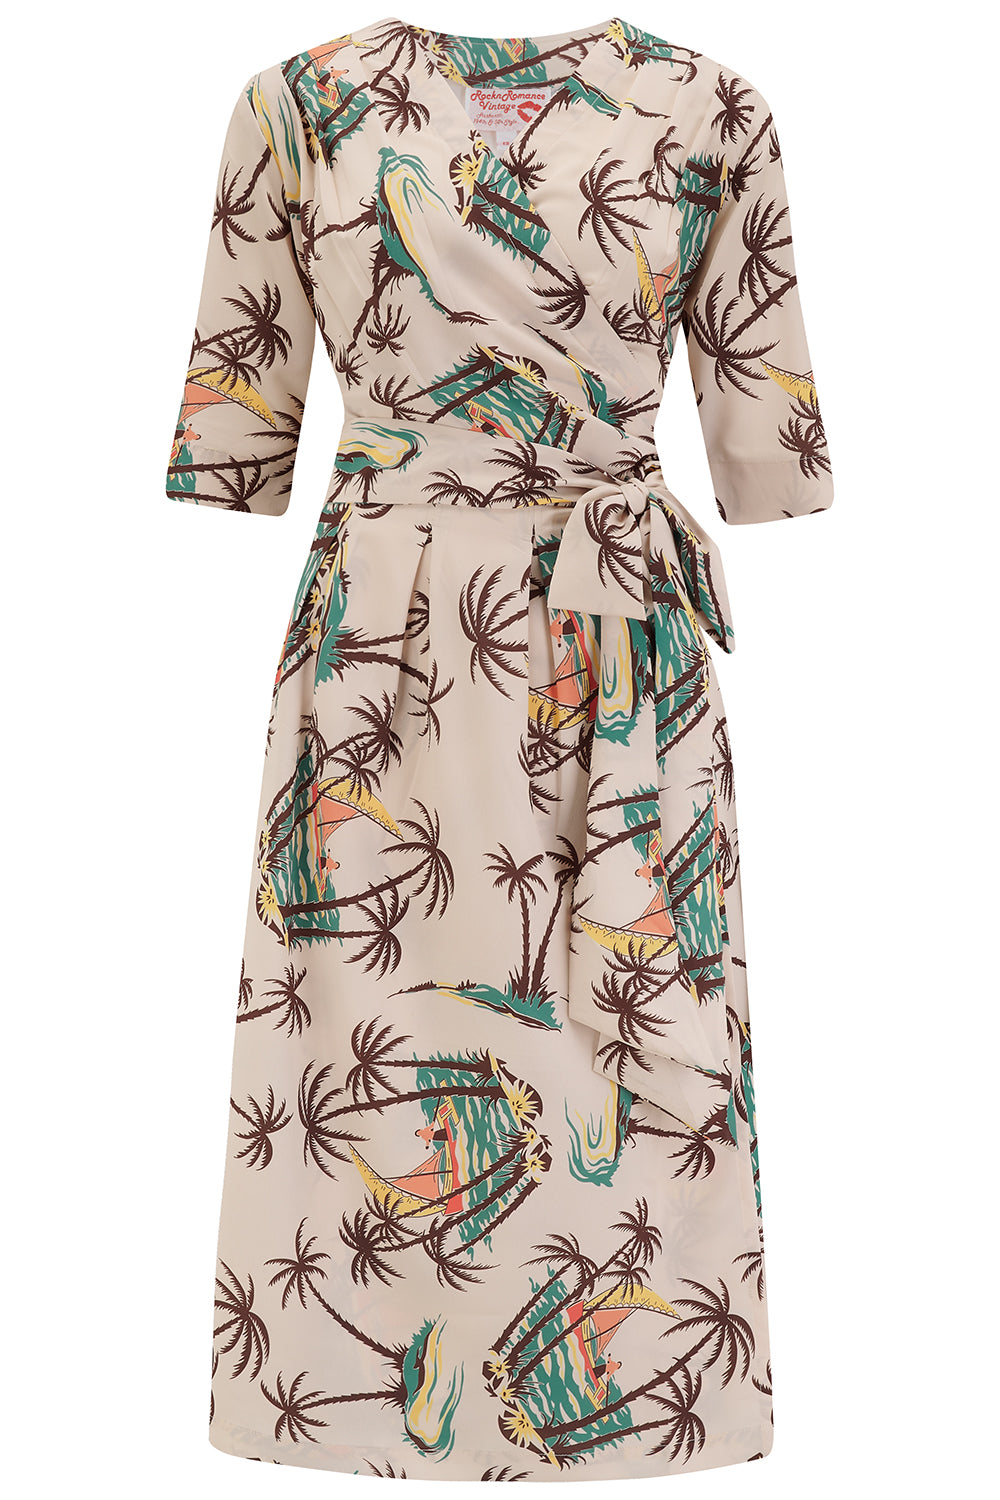 The "Vivien" Full Wrap Dress in Tahiti Print, True 1940s To Early 1950s Style